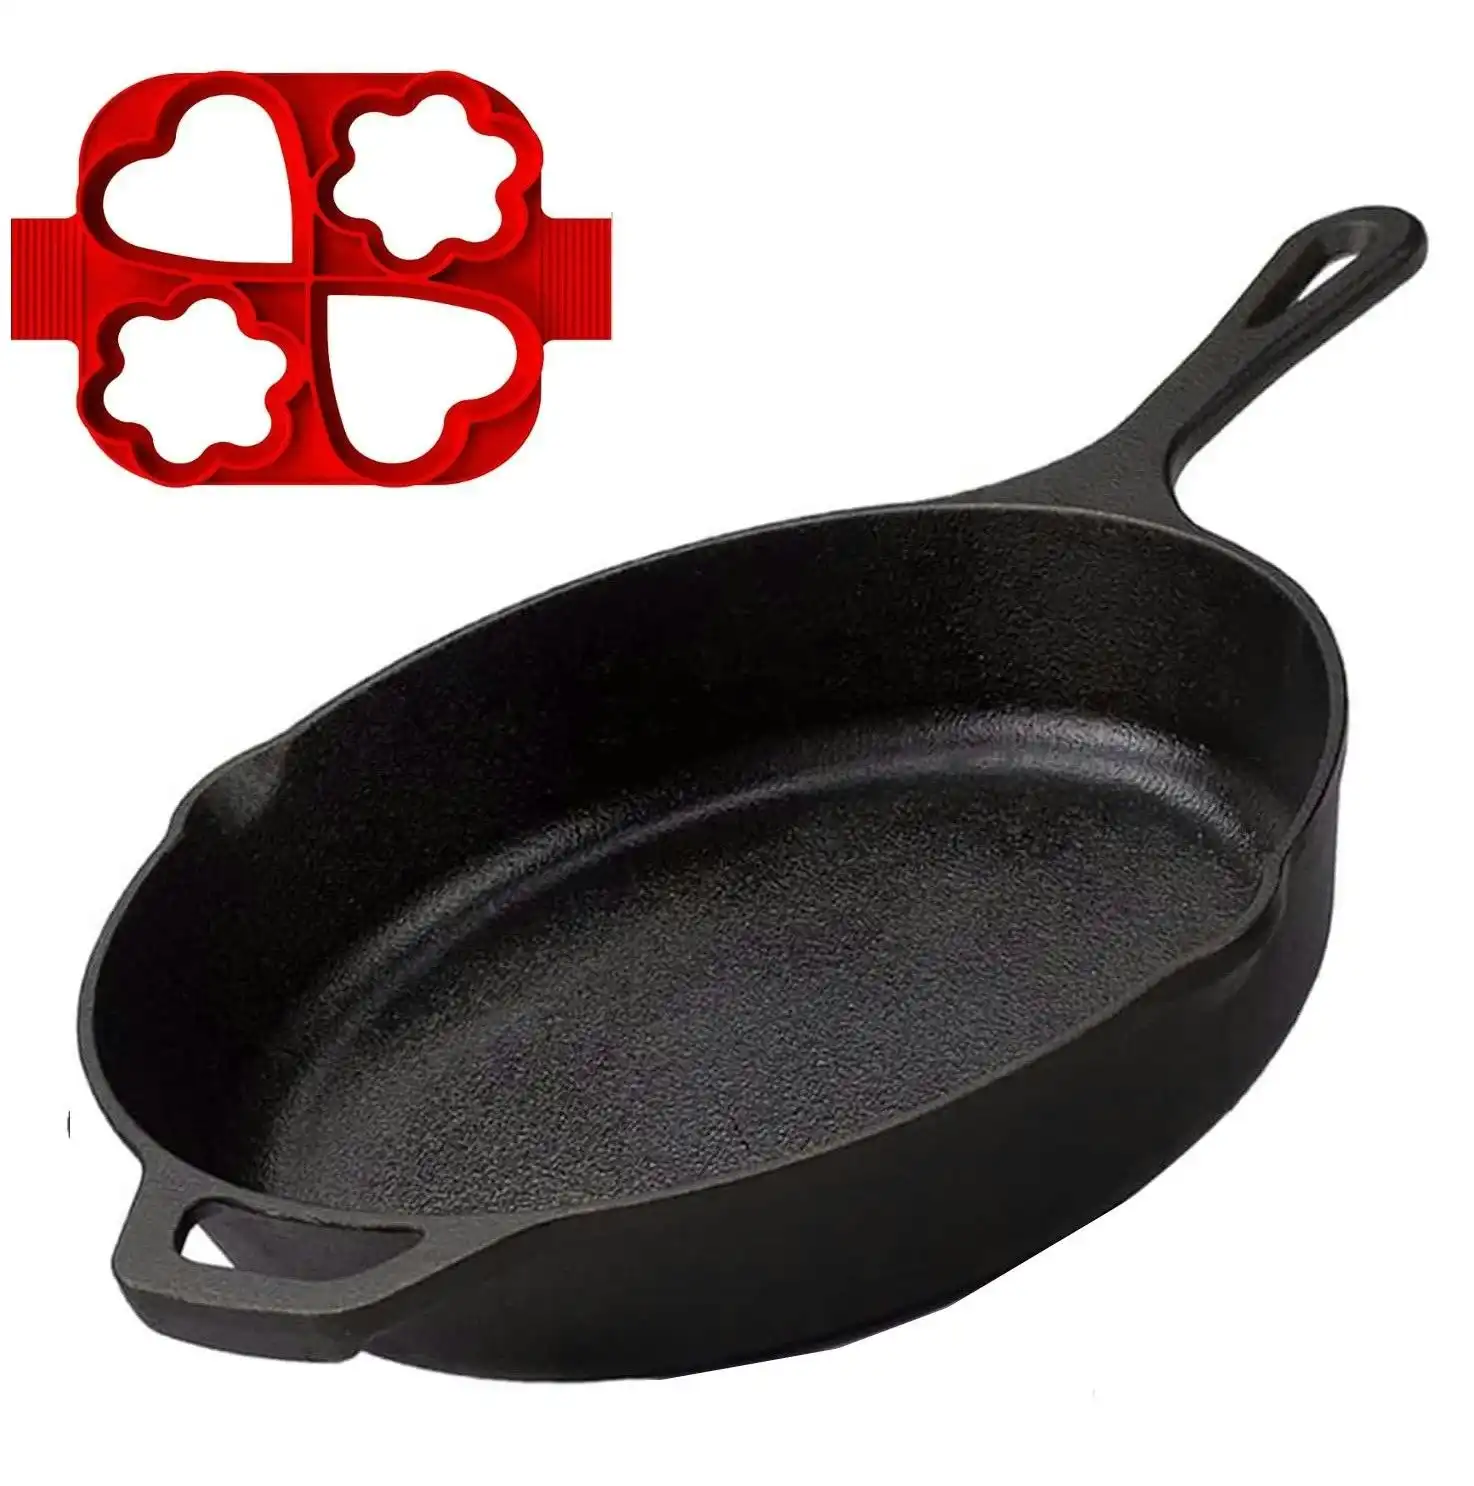 Cast Iron Pan Skillet 30cm Egg Ring Silicone